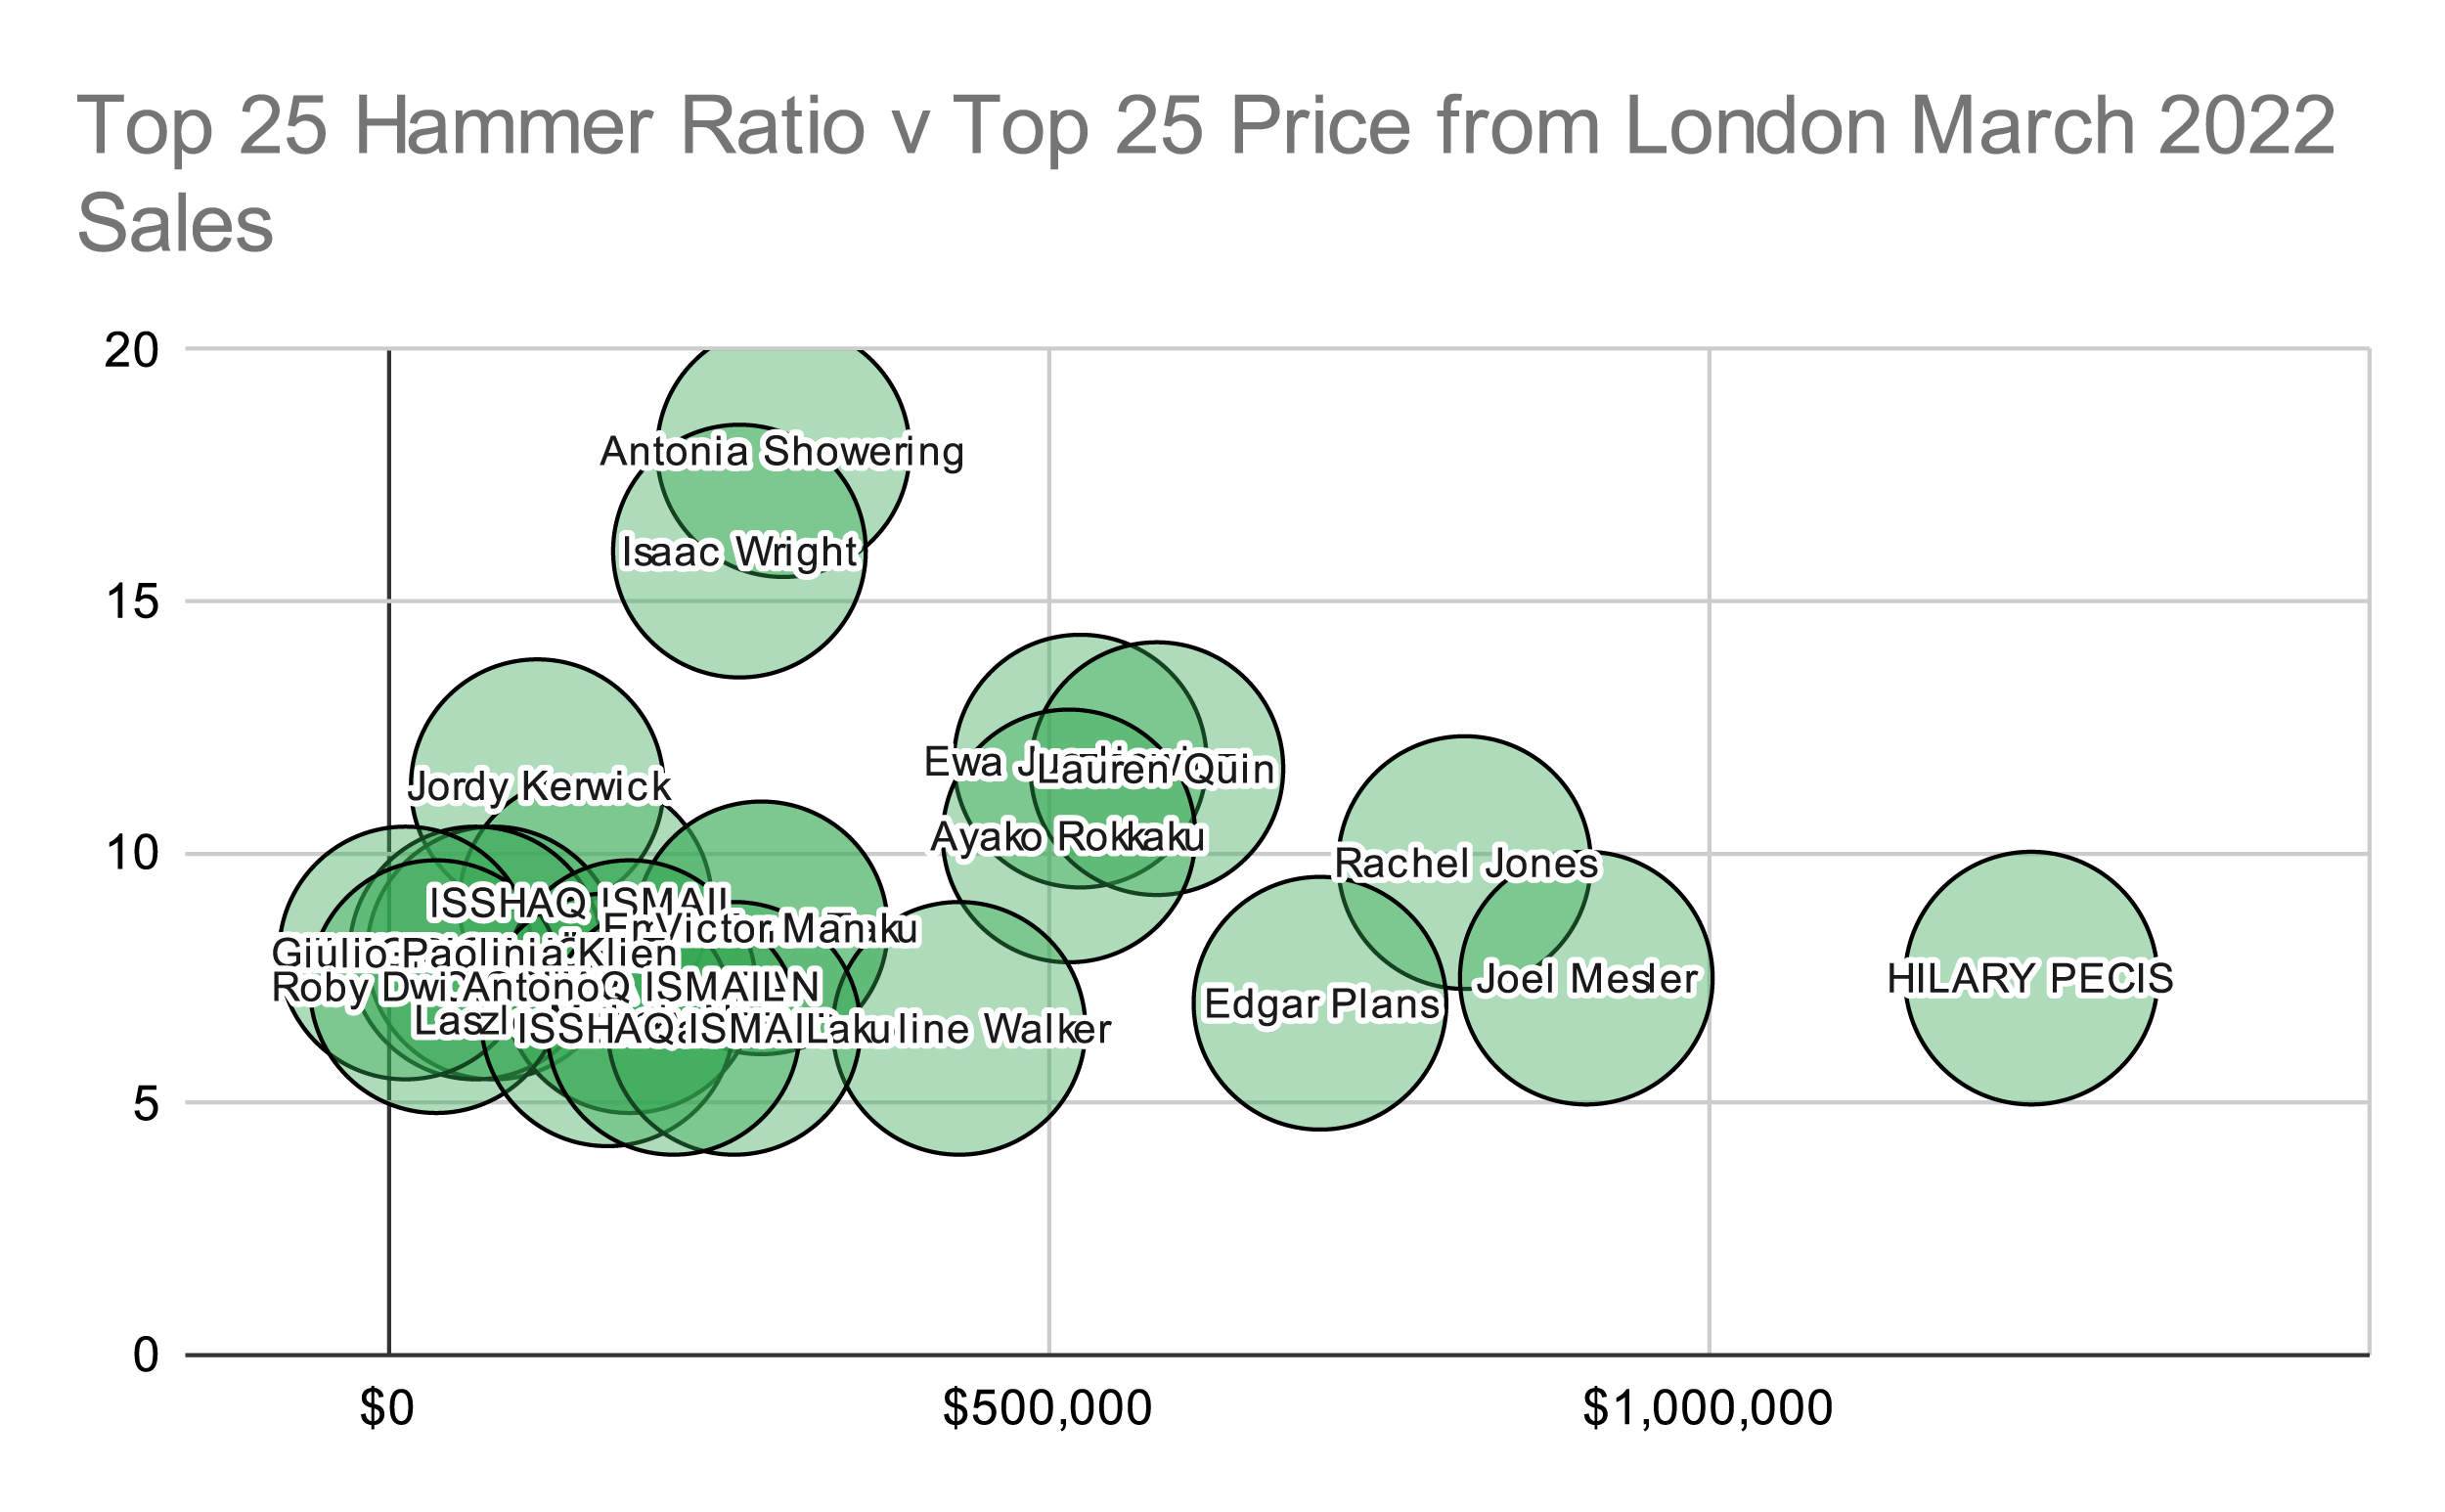 Top 25 Hammer Prices by Hammer Ratio